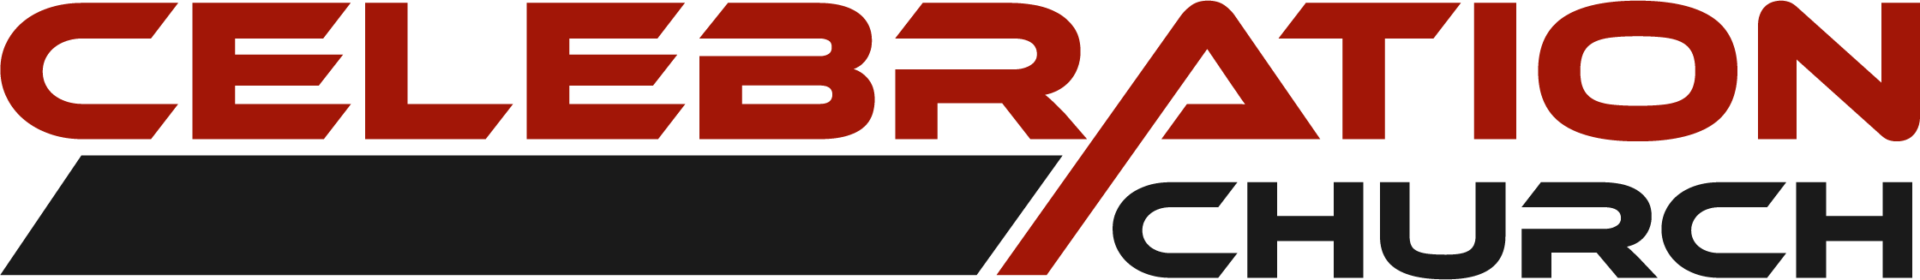 A red and black logo is shown.